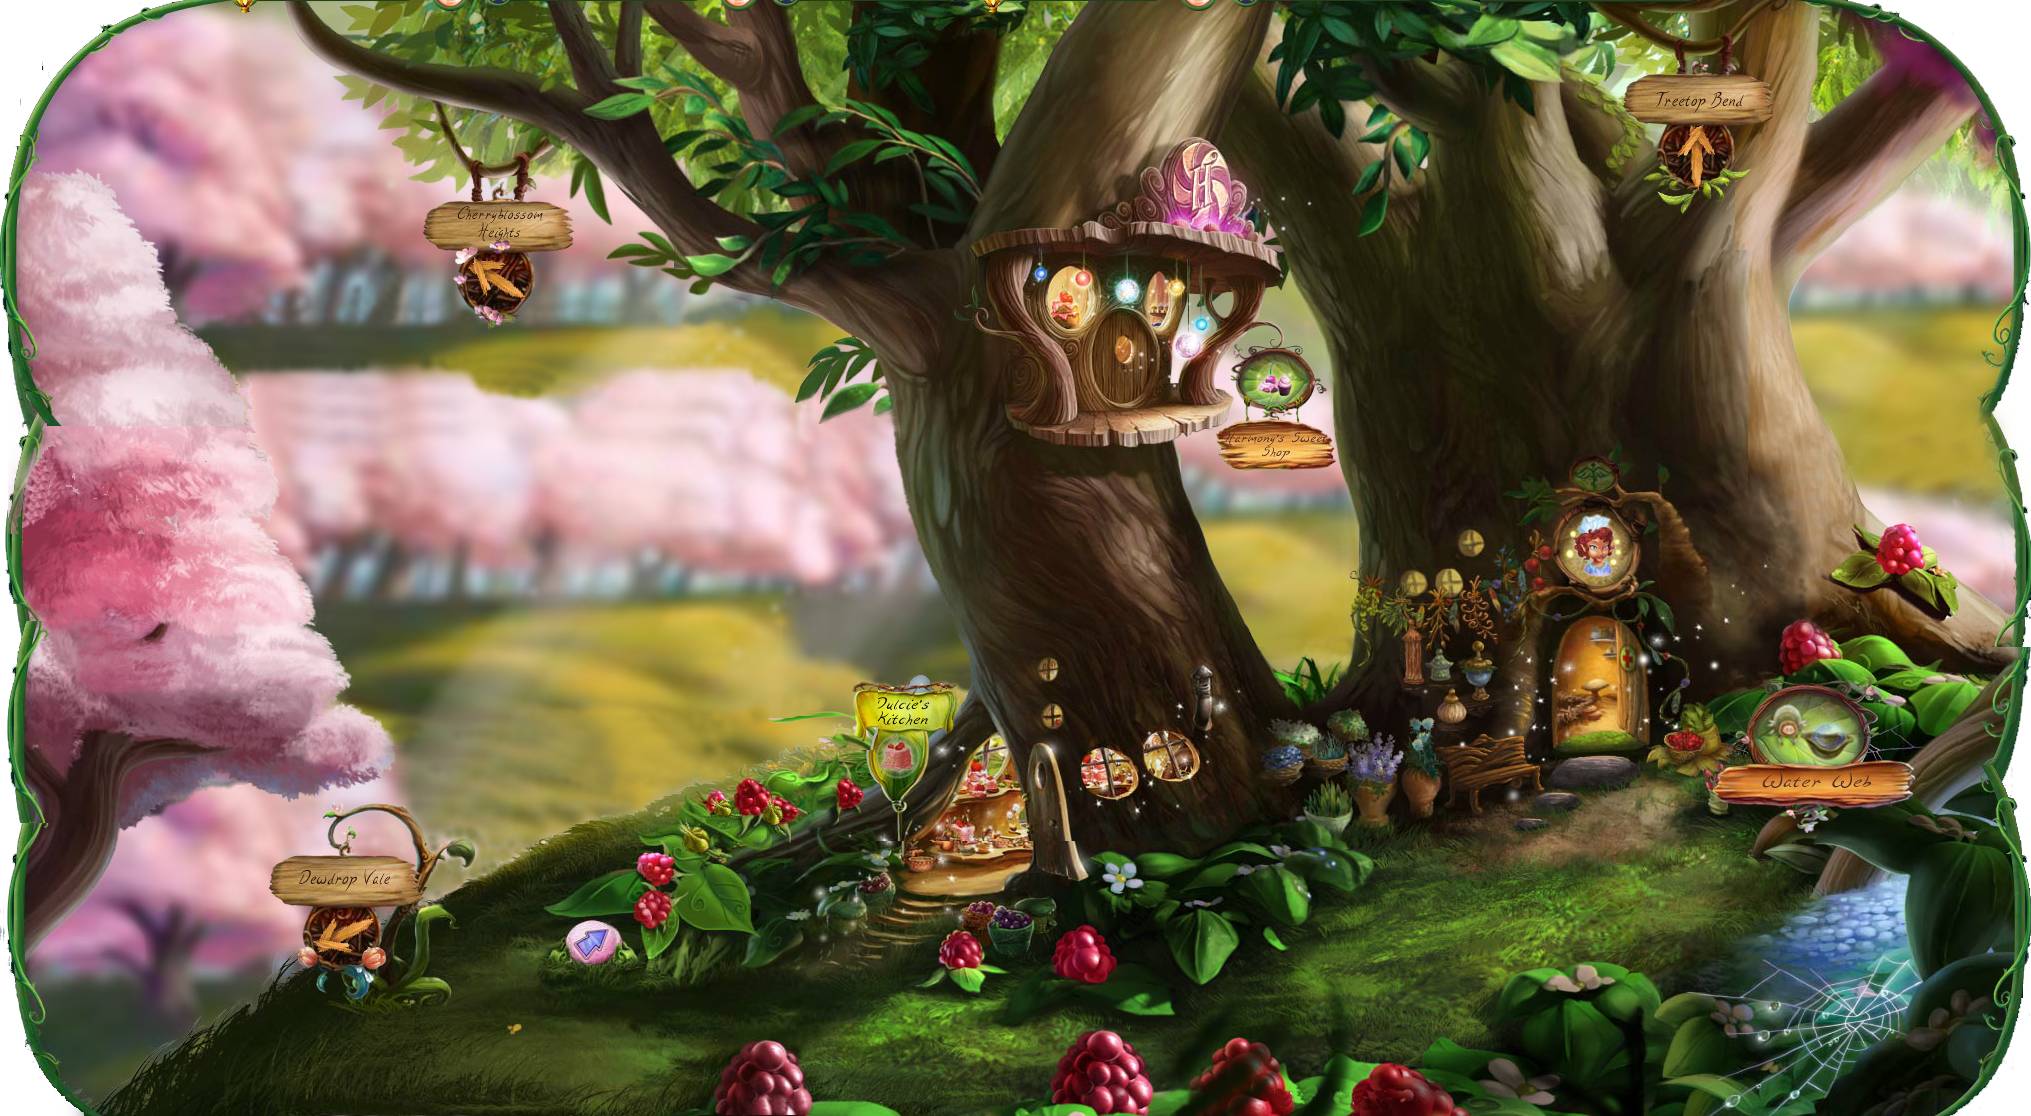 PIXIE HOLLOWS NEVERBERRY THICKET   Pixie Hollow Picture